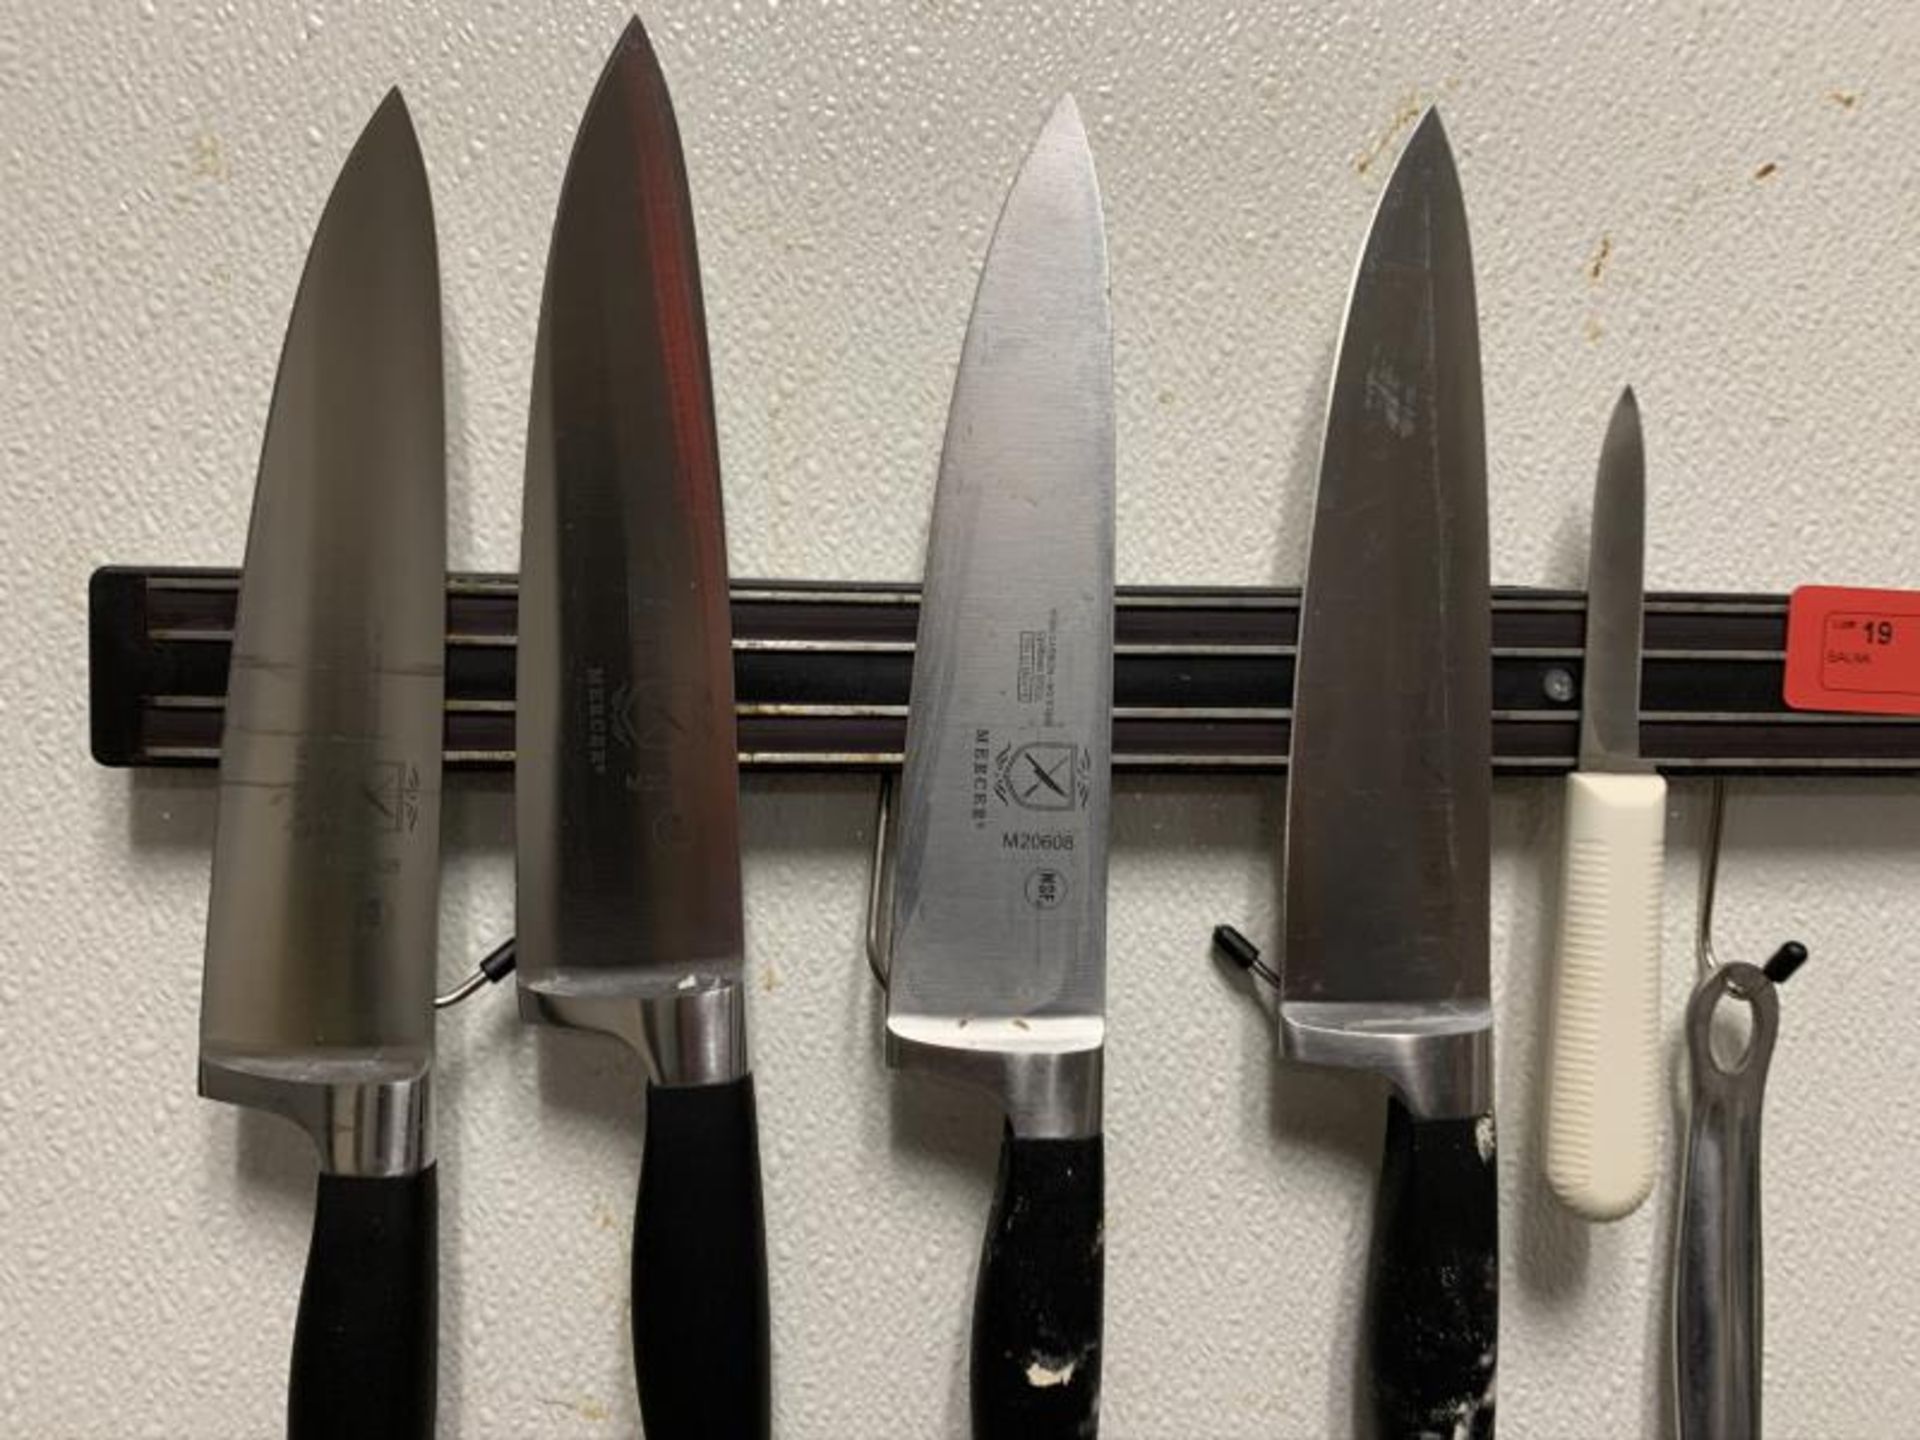 Magnetic Wall Mounted Knife Rack w/ (4) Mercer M20608 Knives - Image 2 of 2